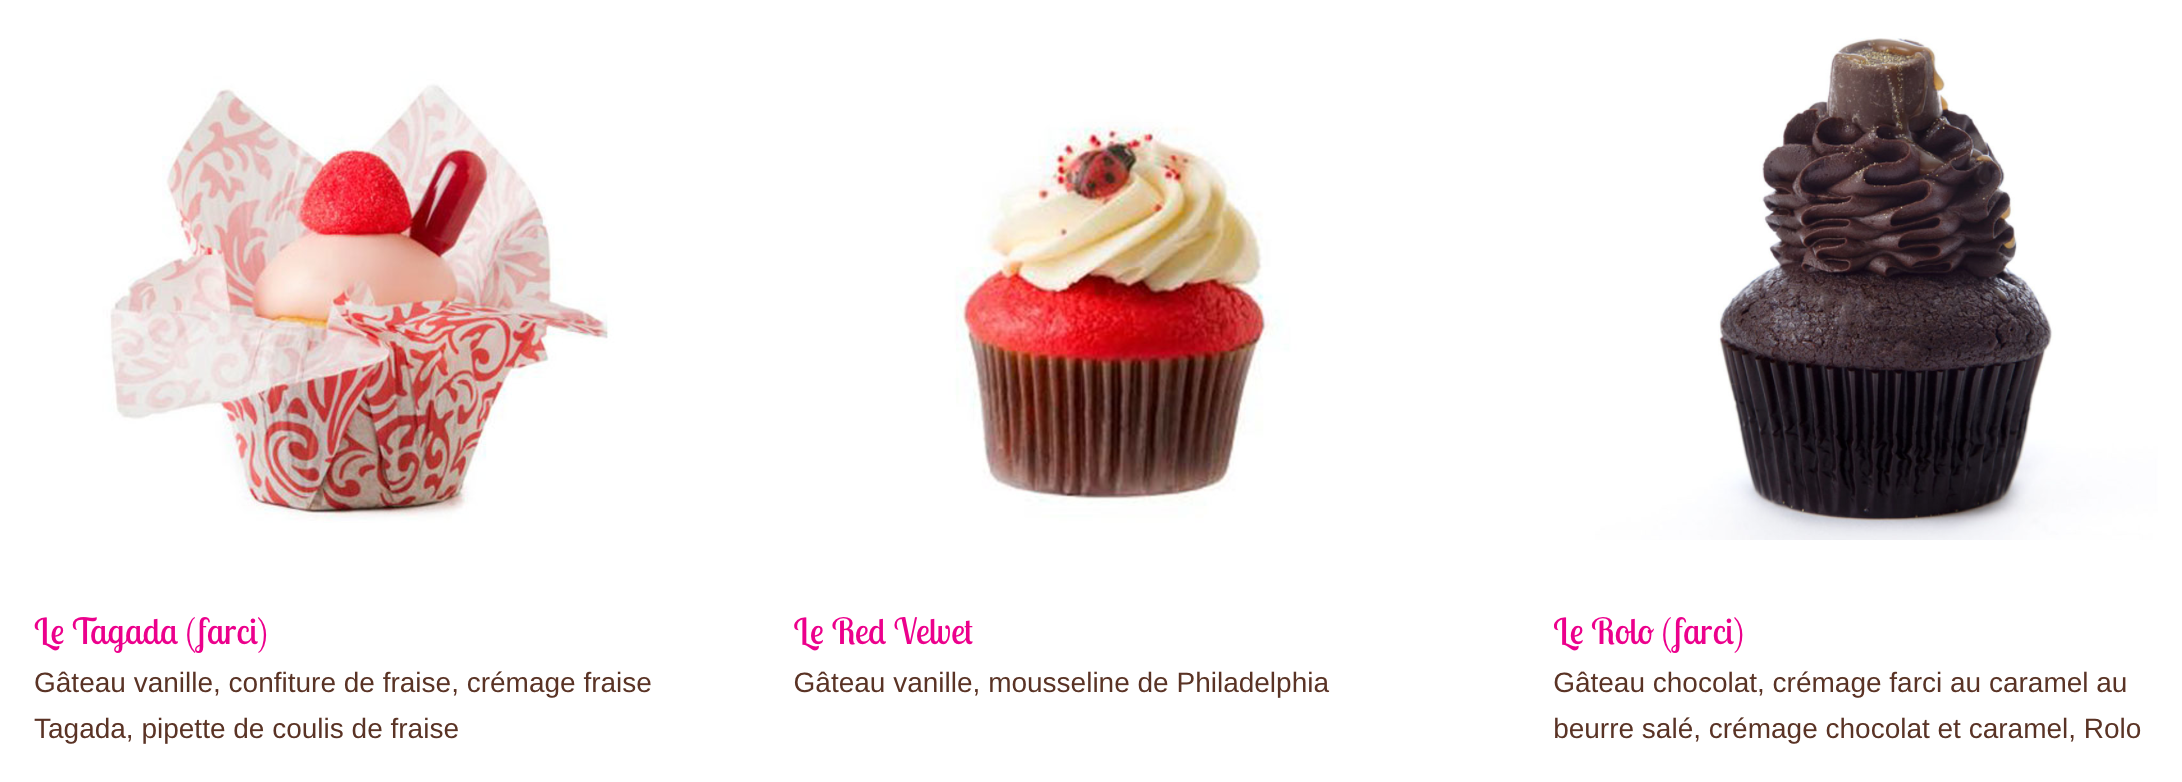 cupcake-fraise-rouge-délicieux-red-velvet-coccinelle-cupcake-coquelicot